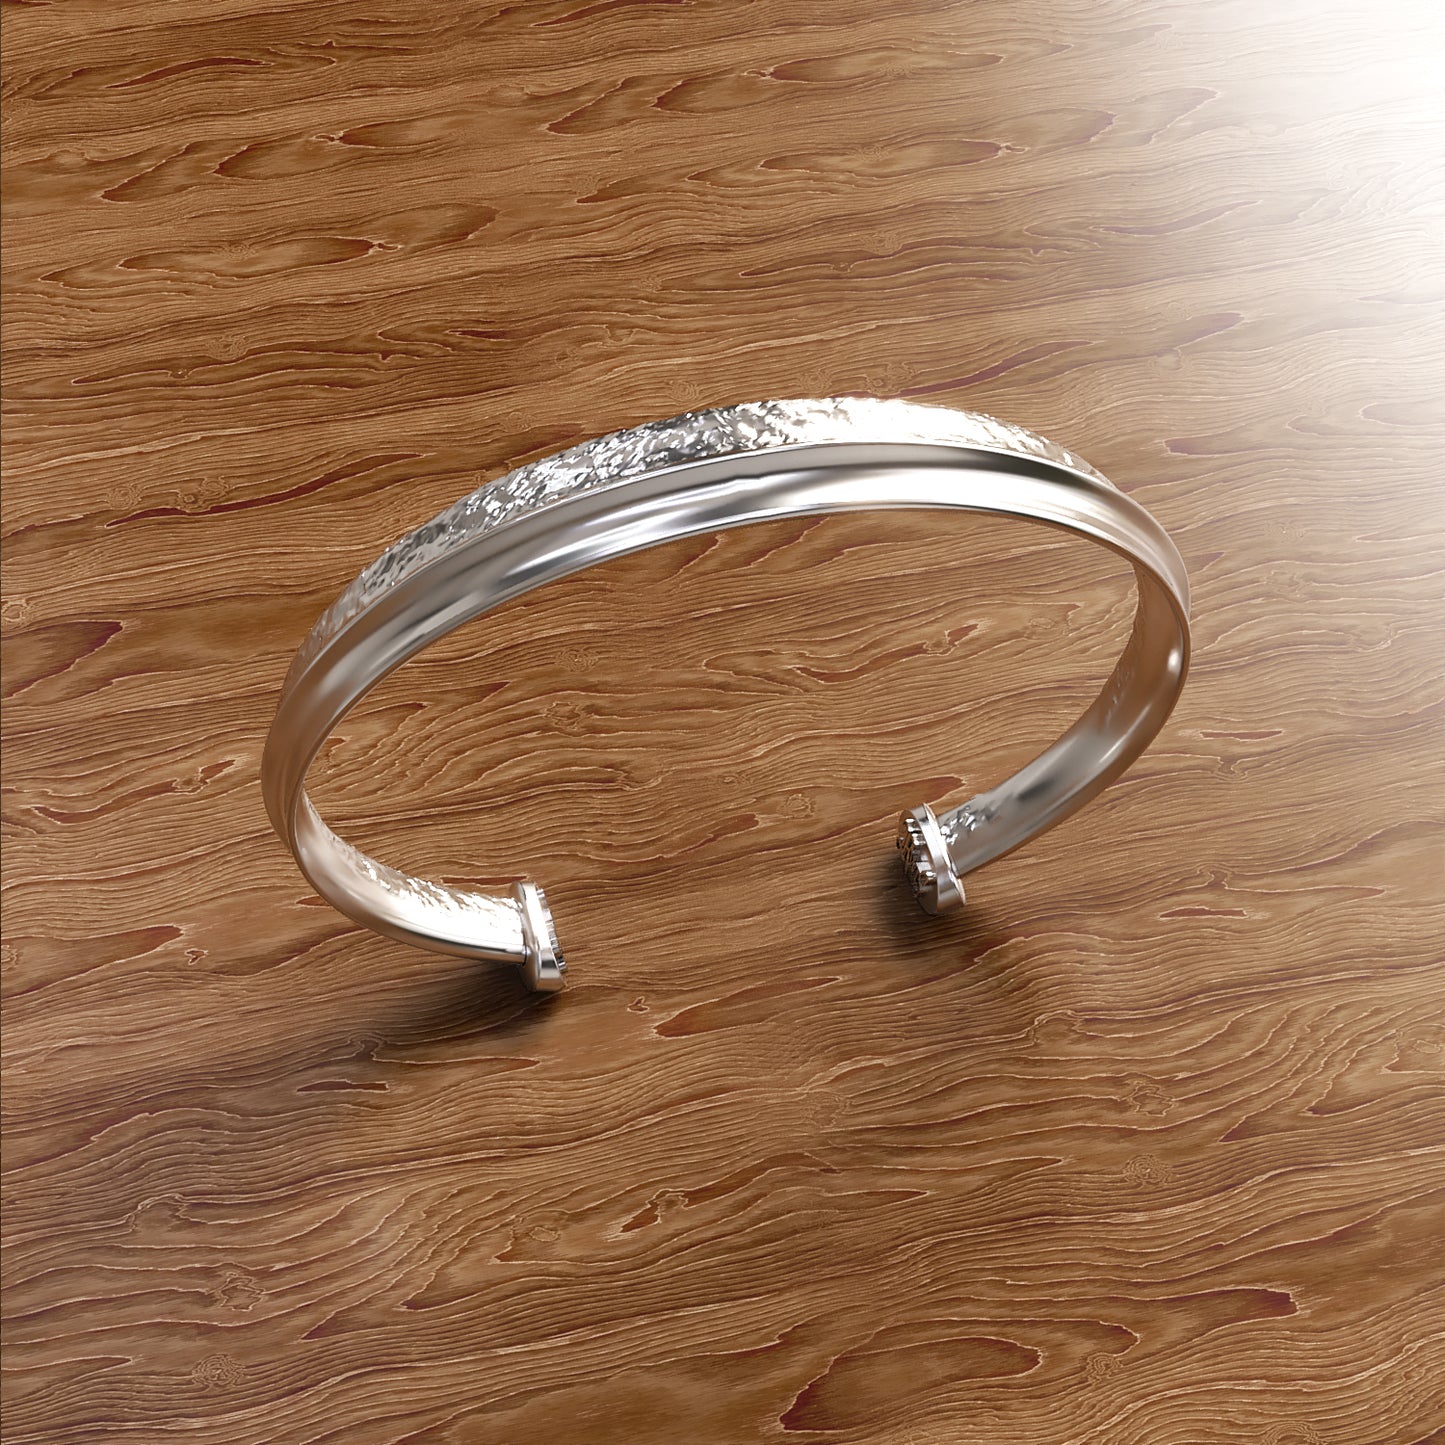 Rough with the Smooth: Men's Sterling Silver Bracelet